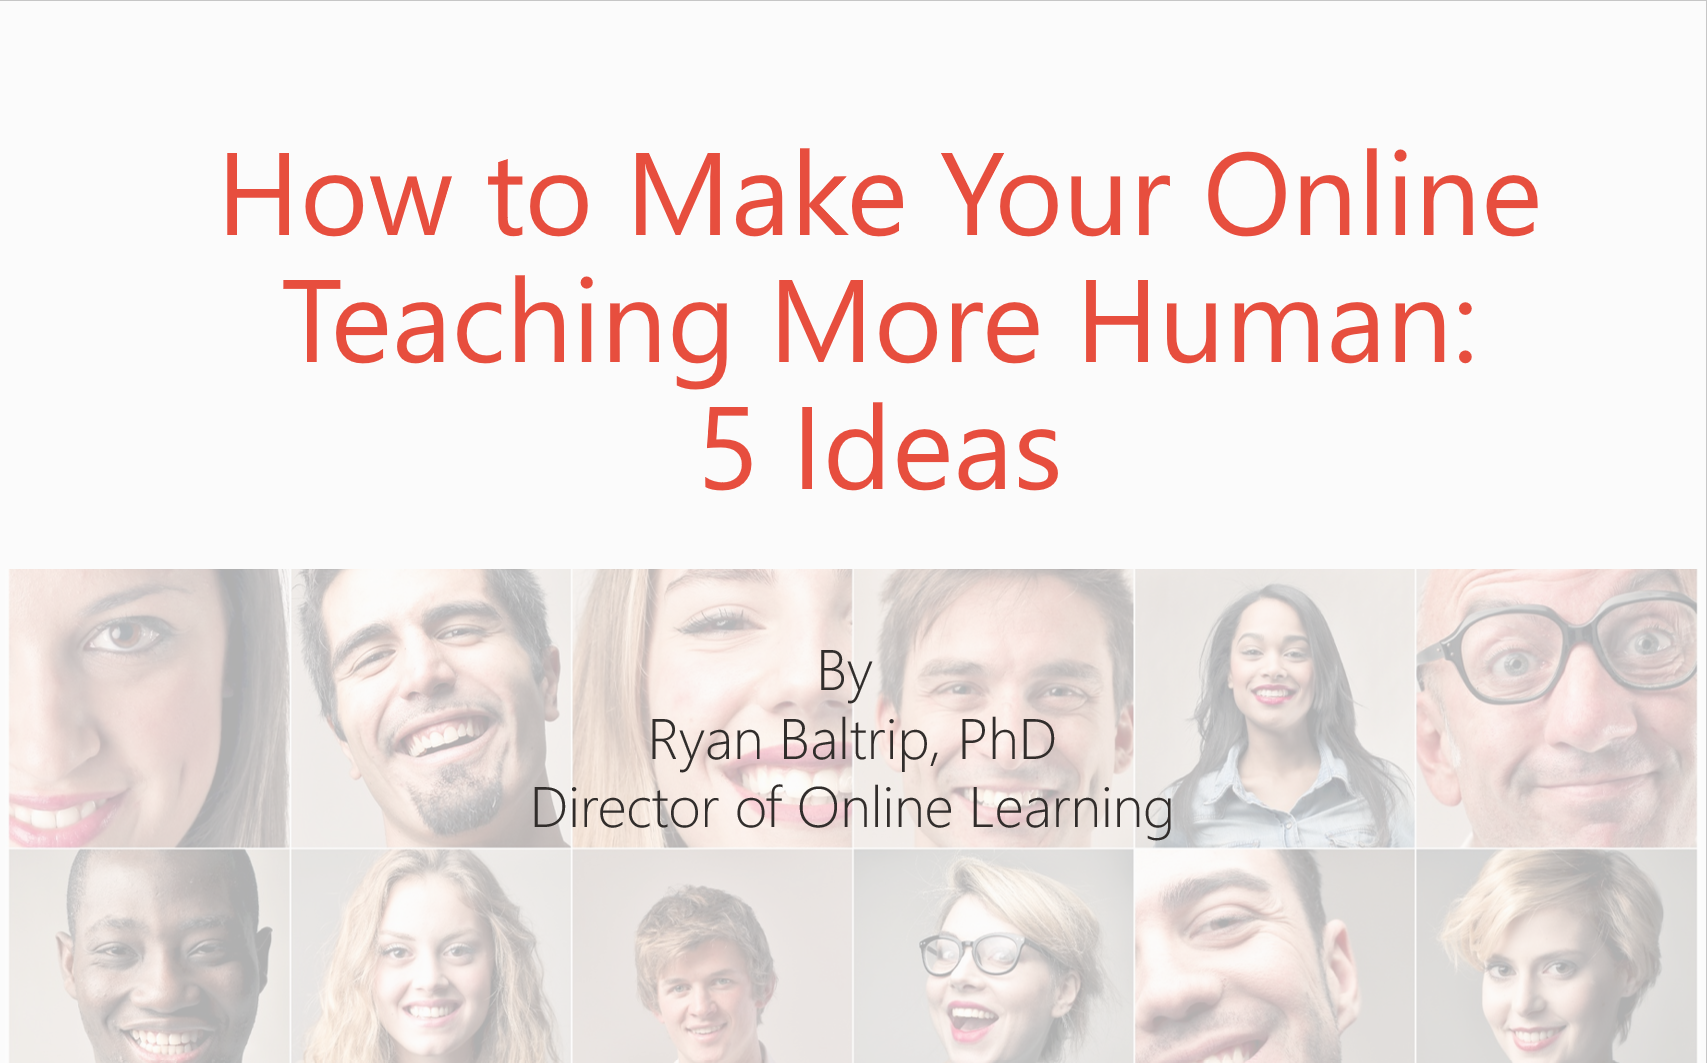 How to Make Your Online Teaching More Human - 5 Ideas